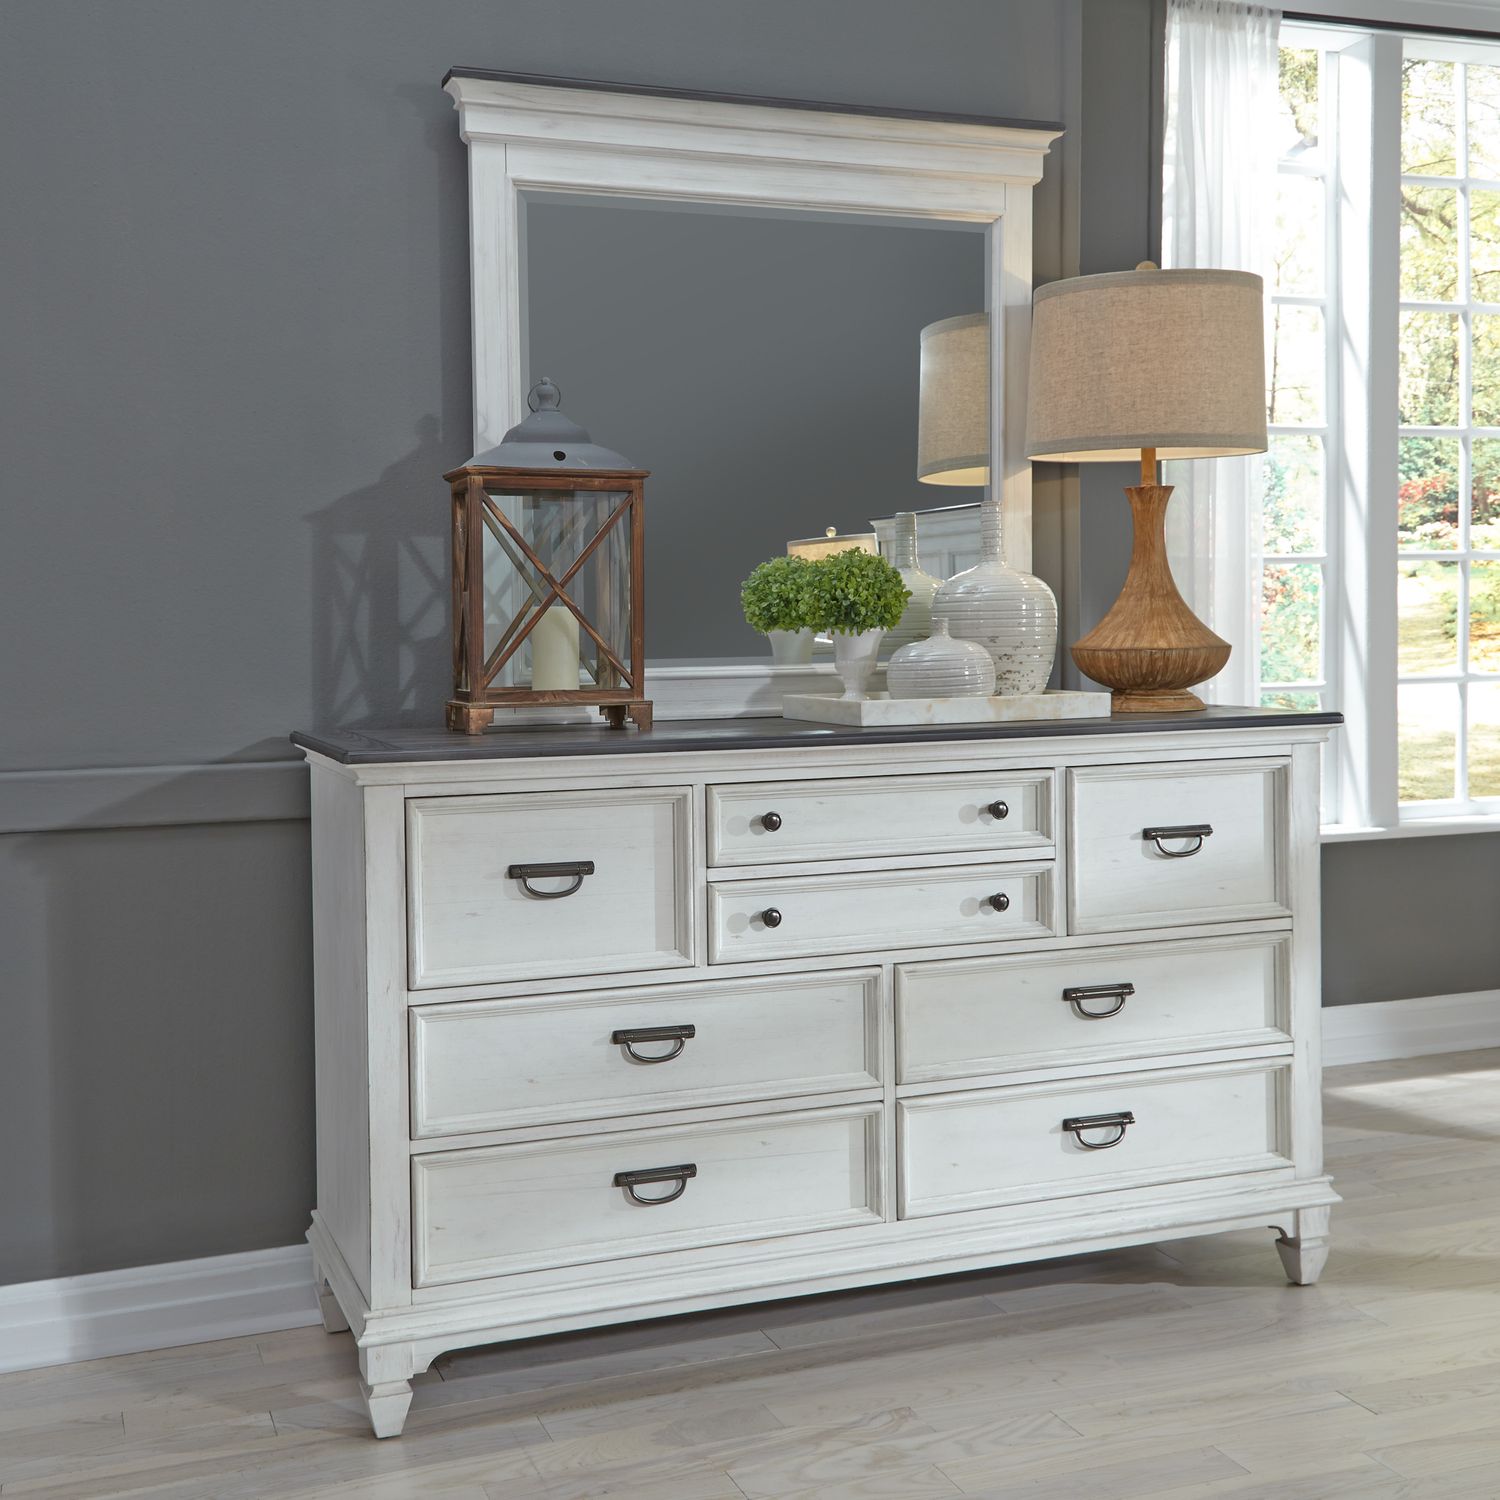 Allyson Park 417-BR Panel Bedroom Collection from Liberty Furniture